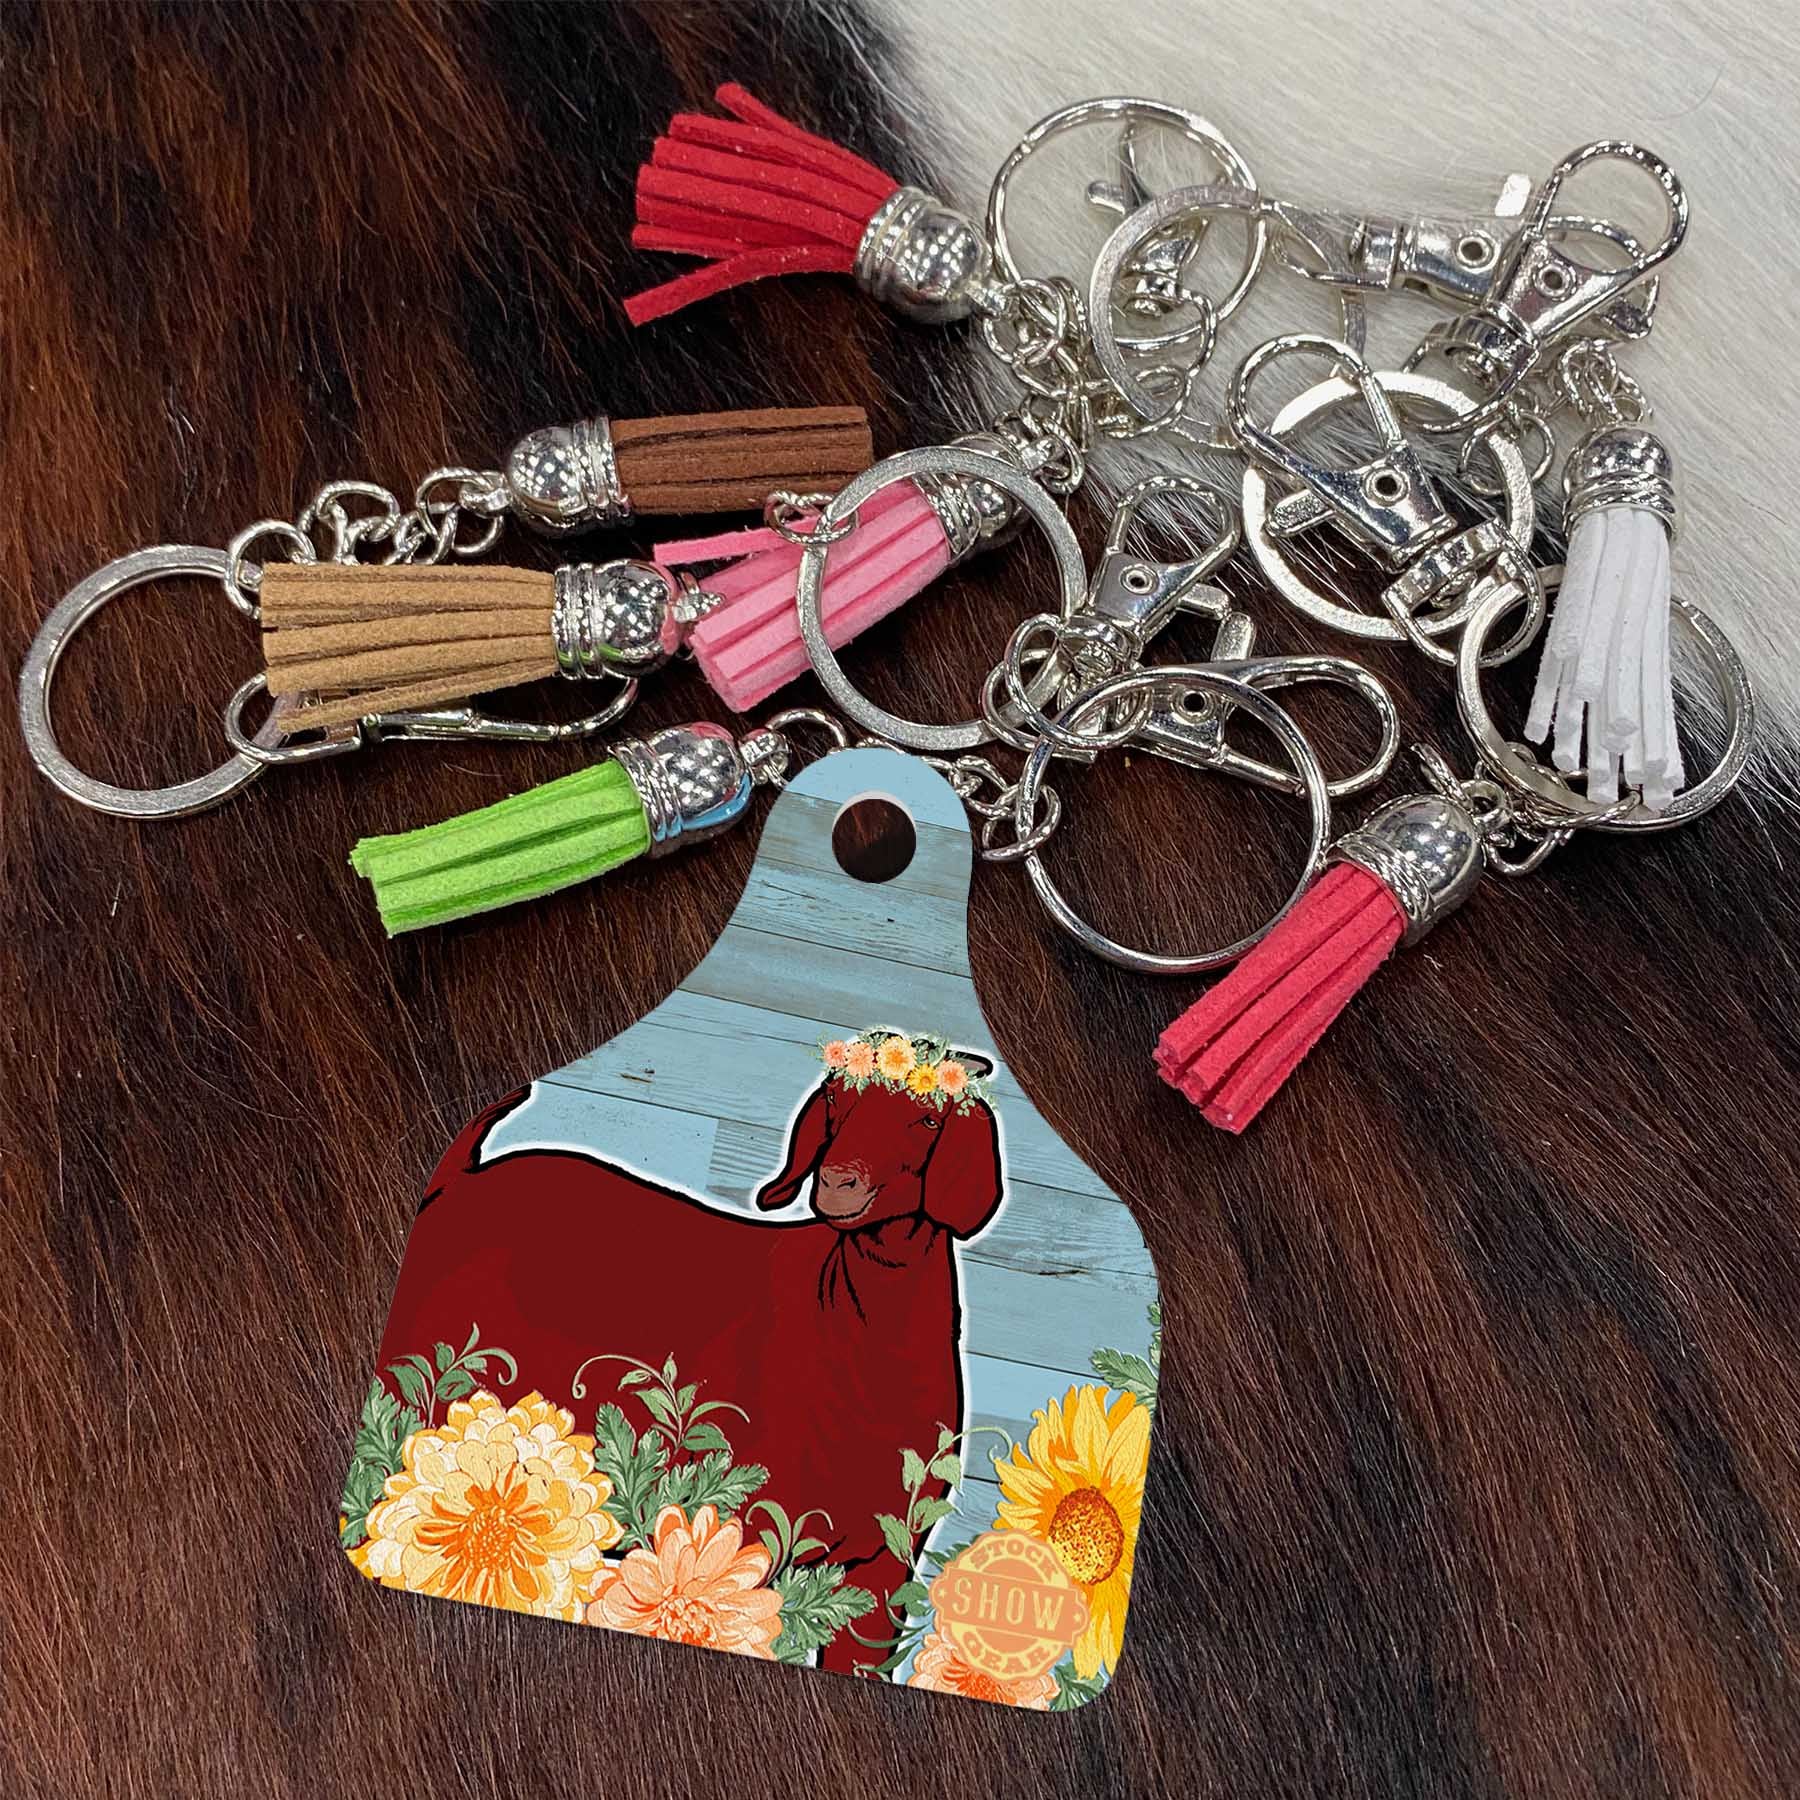 Red Boer Goat Keychains